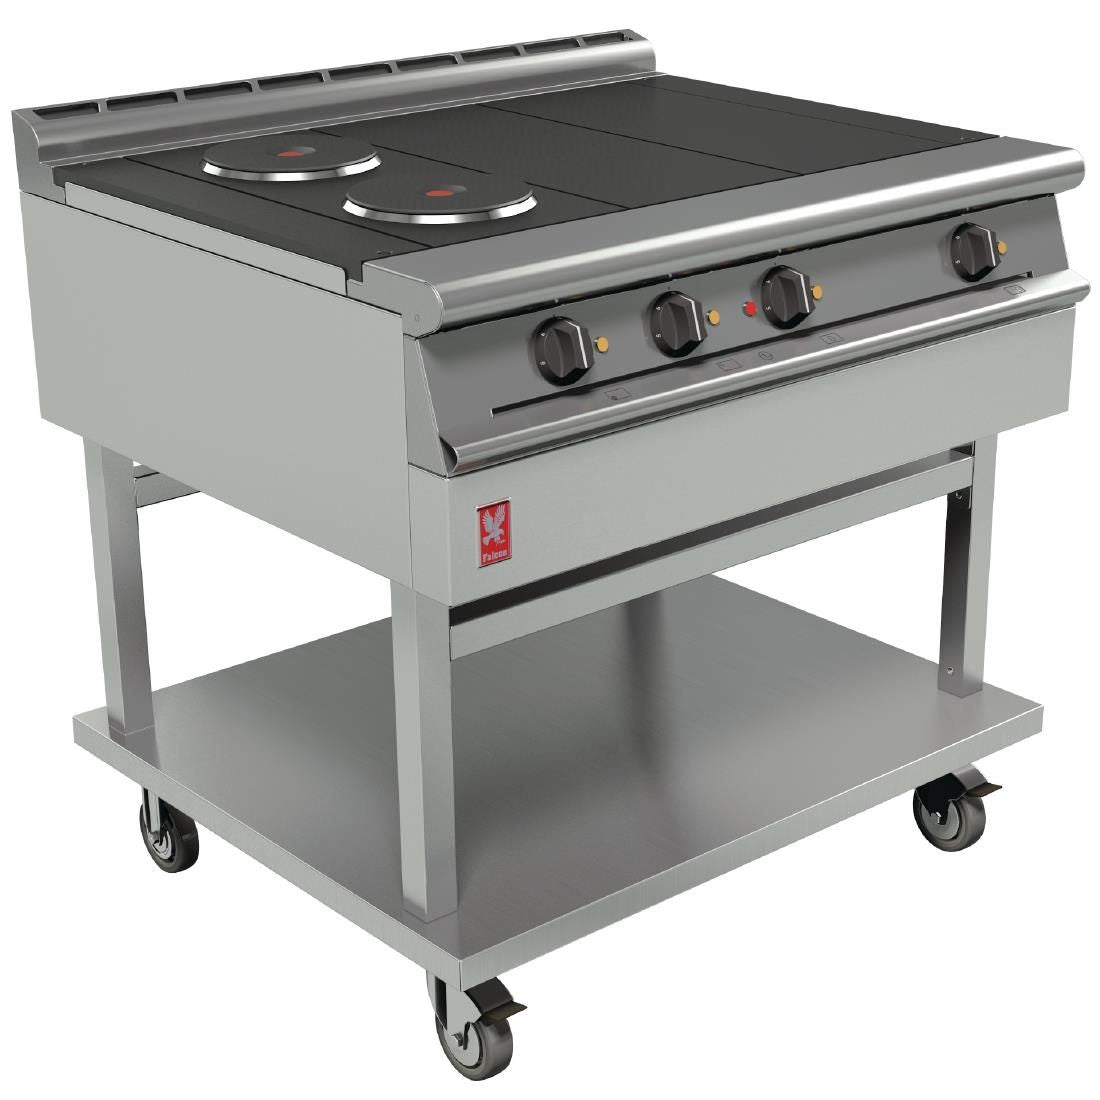 Falcon Dominator Plus 4 Hotplate Boiling Table With Castors E3121 JD Catering Equipment Solutions Ltd